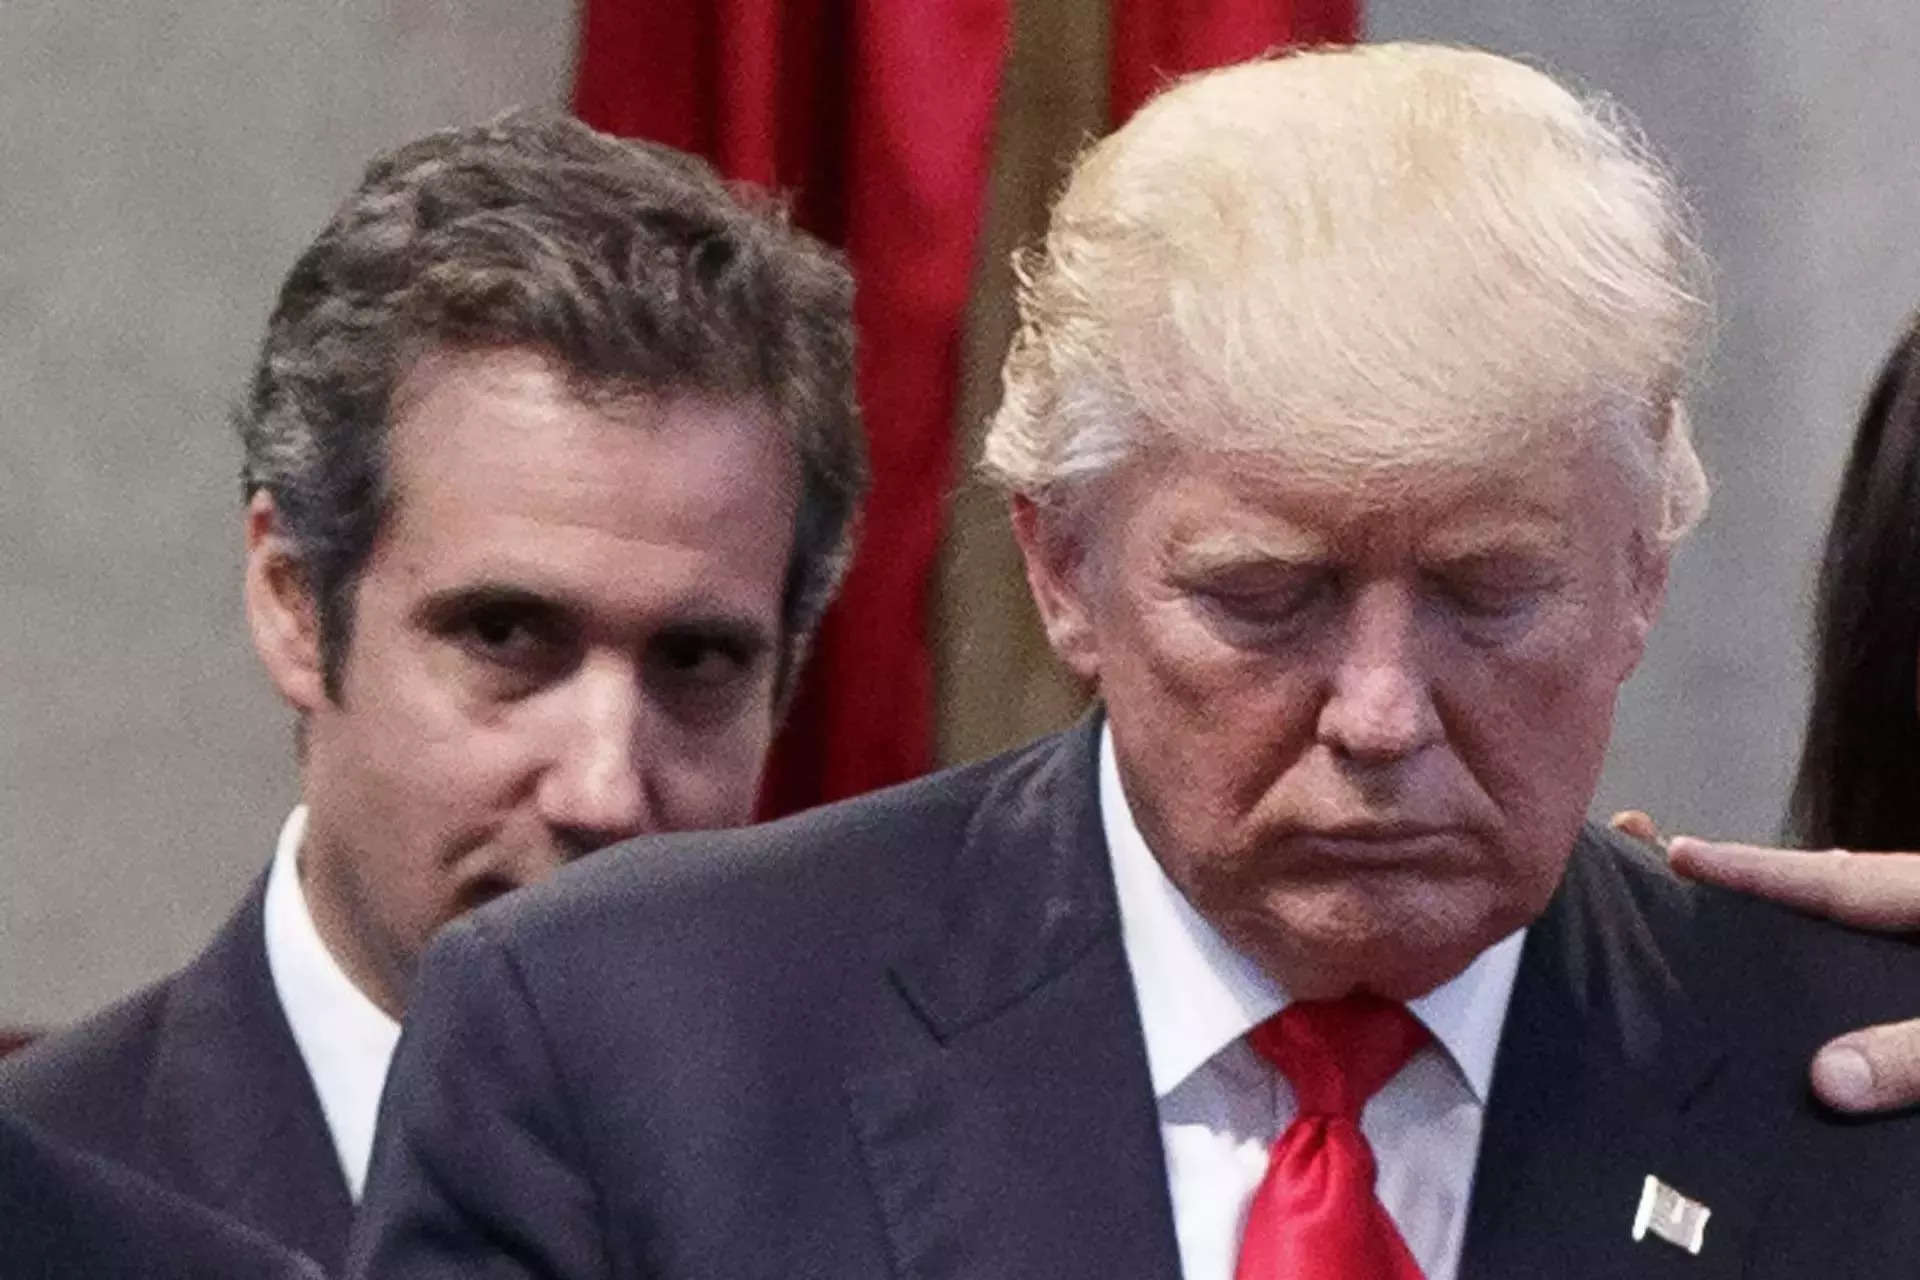 In court, Michael Cohen admits to stealing from Donald Trump's company